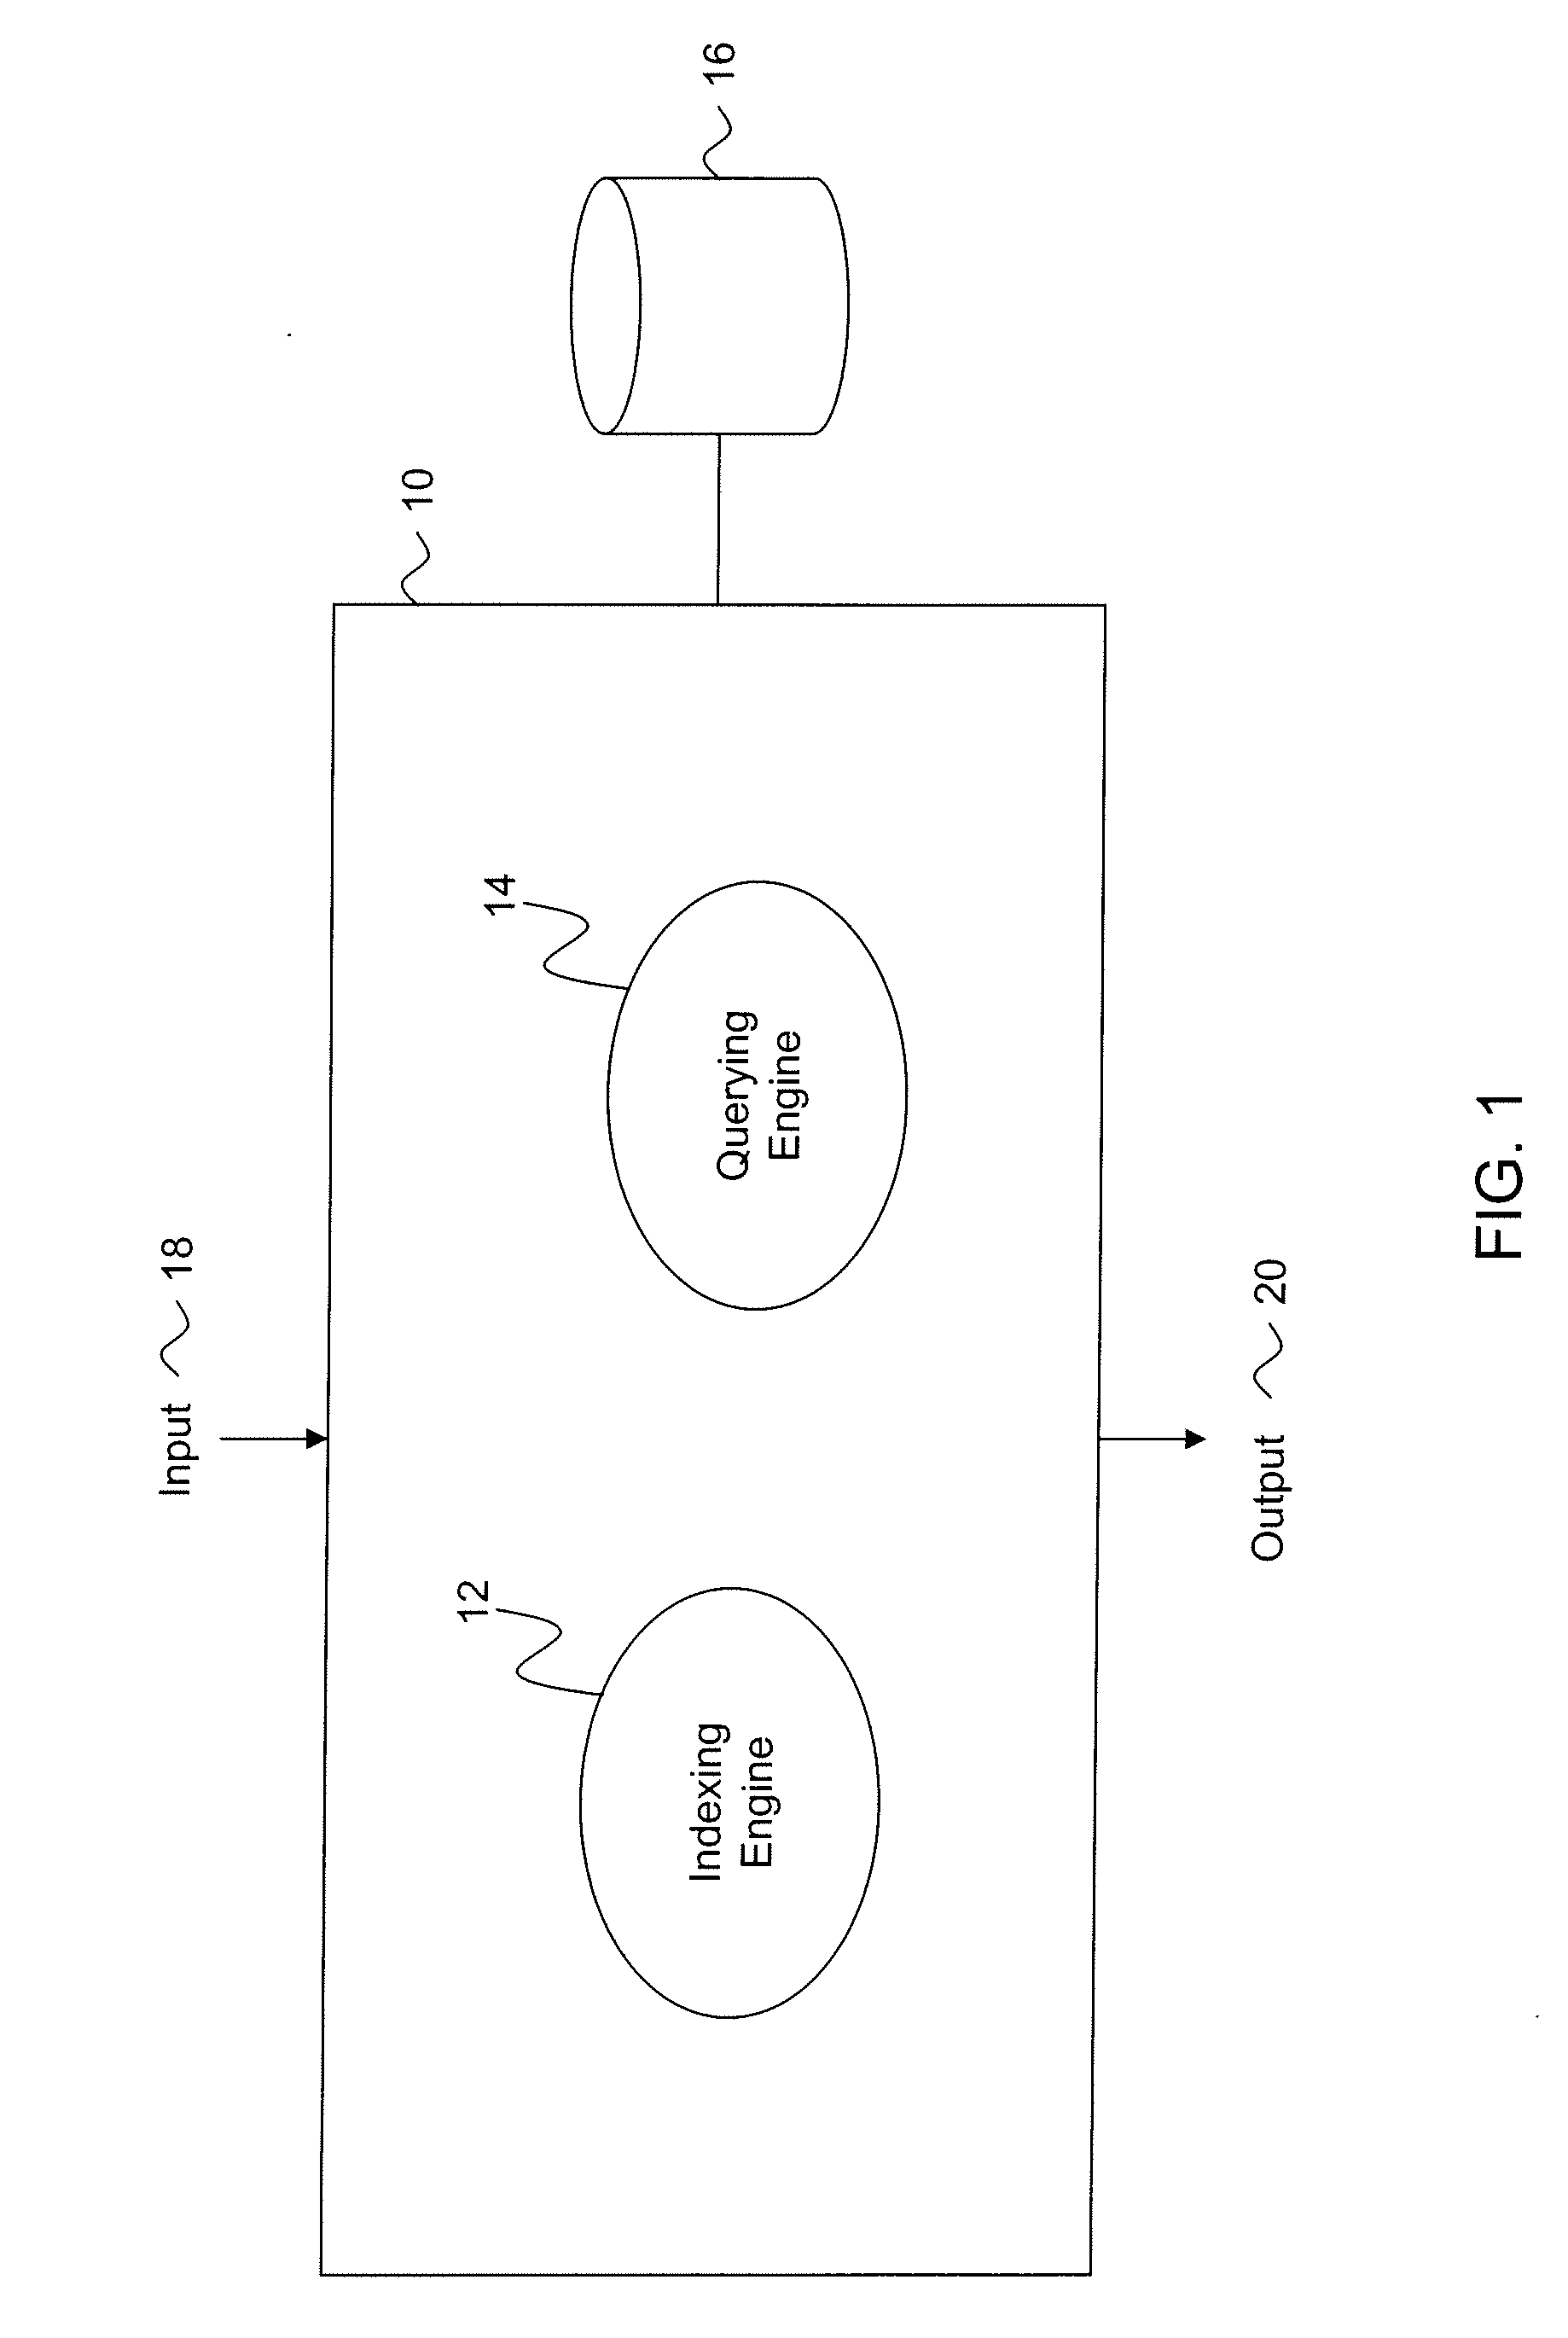 System and Method for Building and Retrieving a Full Text Index